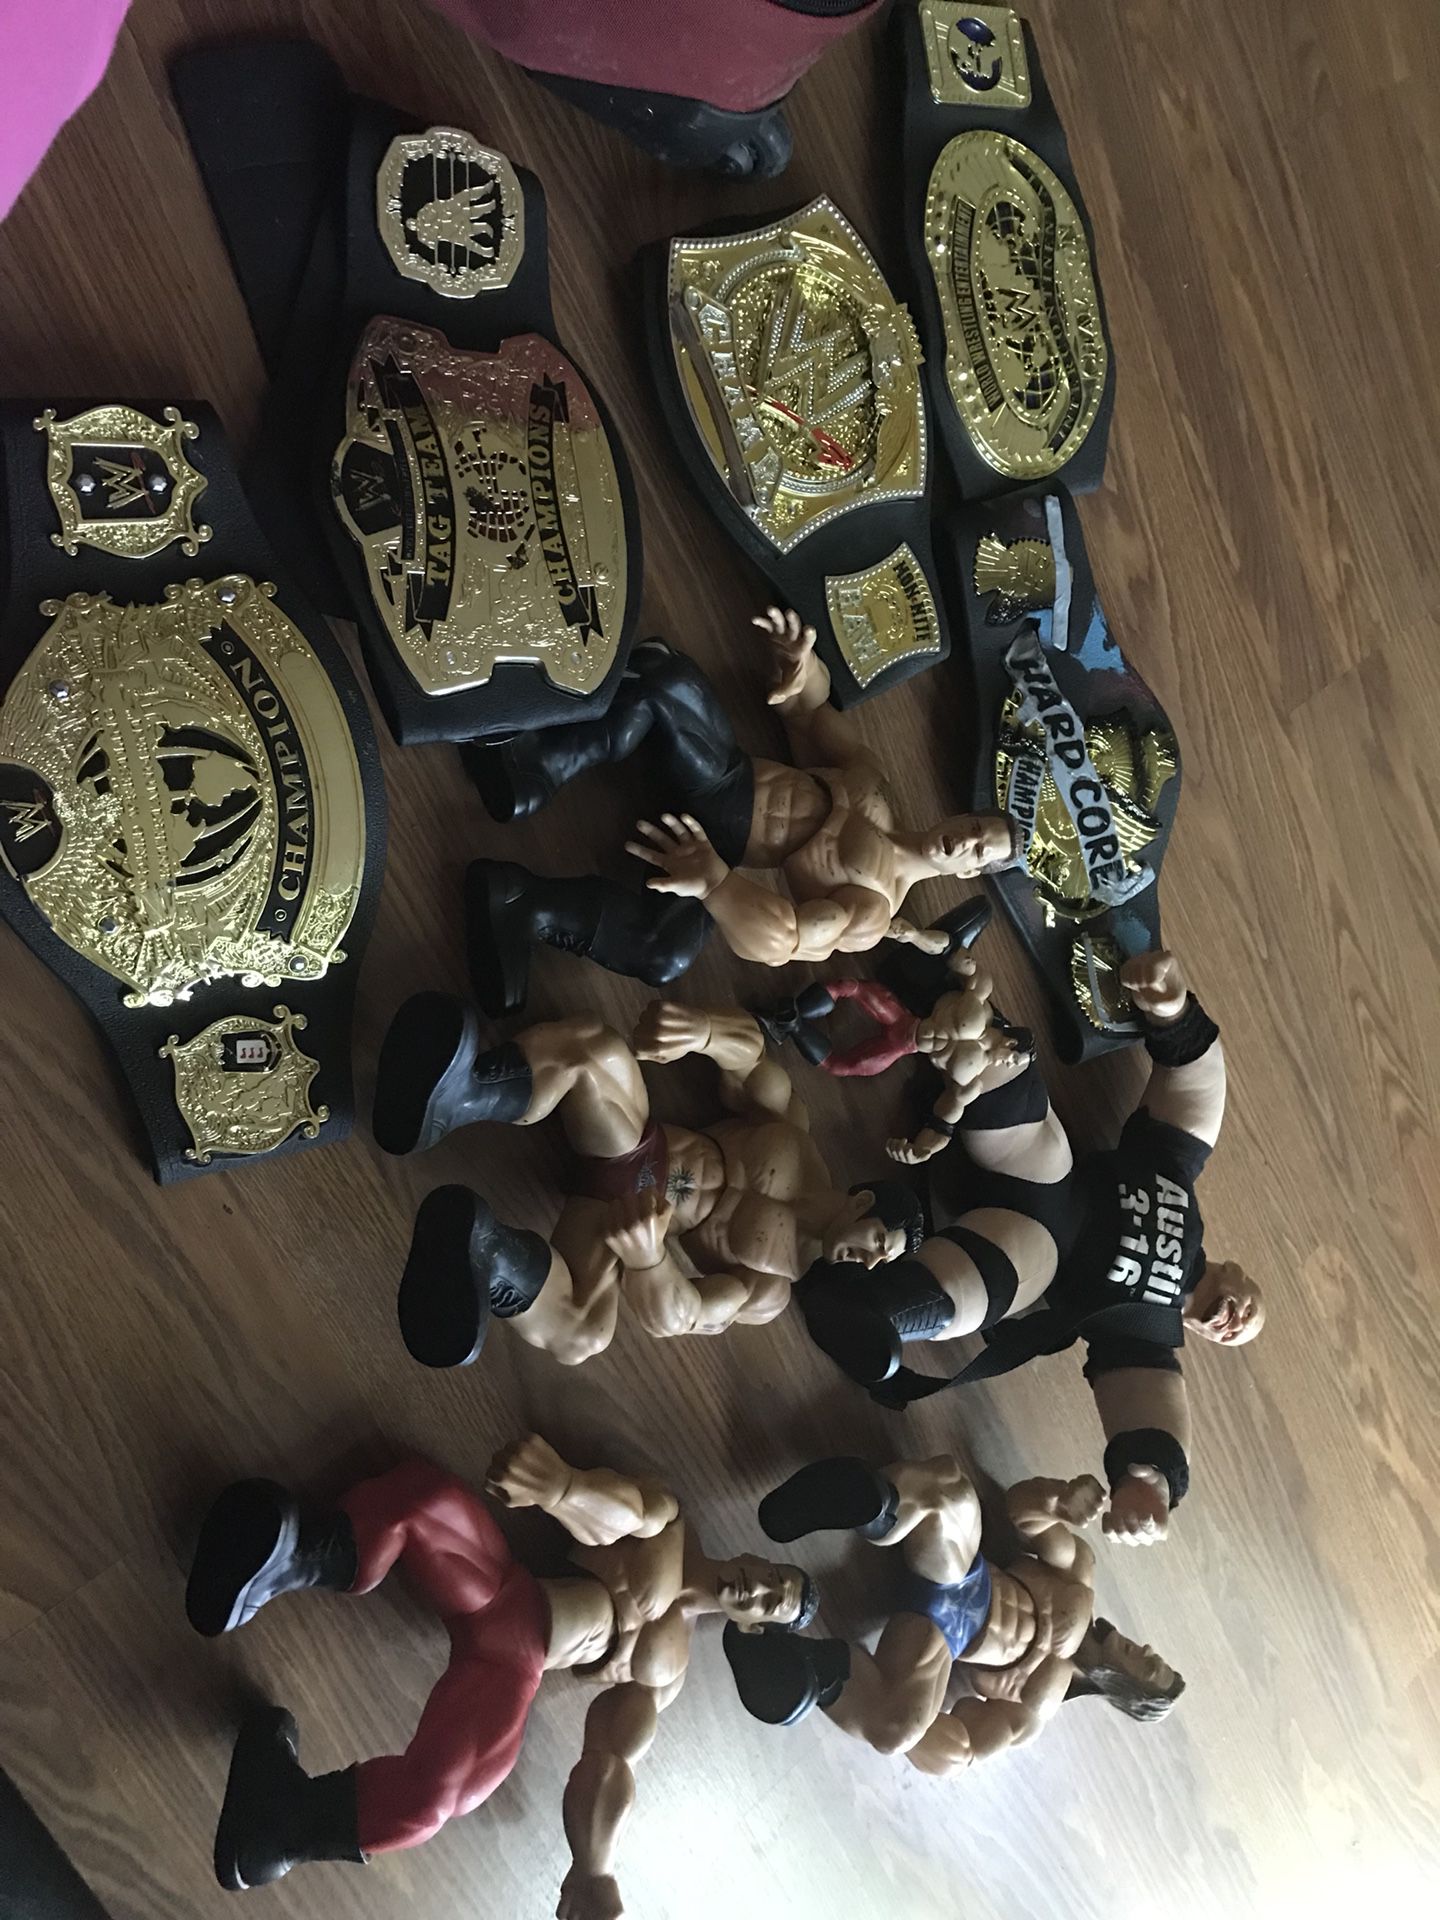 Oversized wrestling figures and toy belts